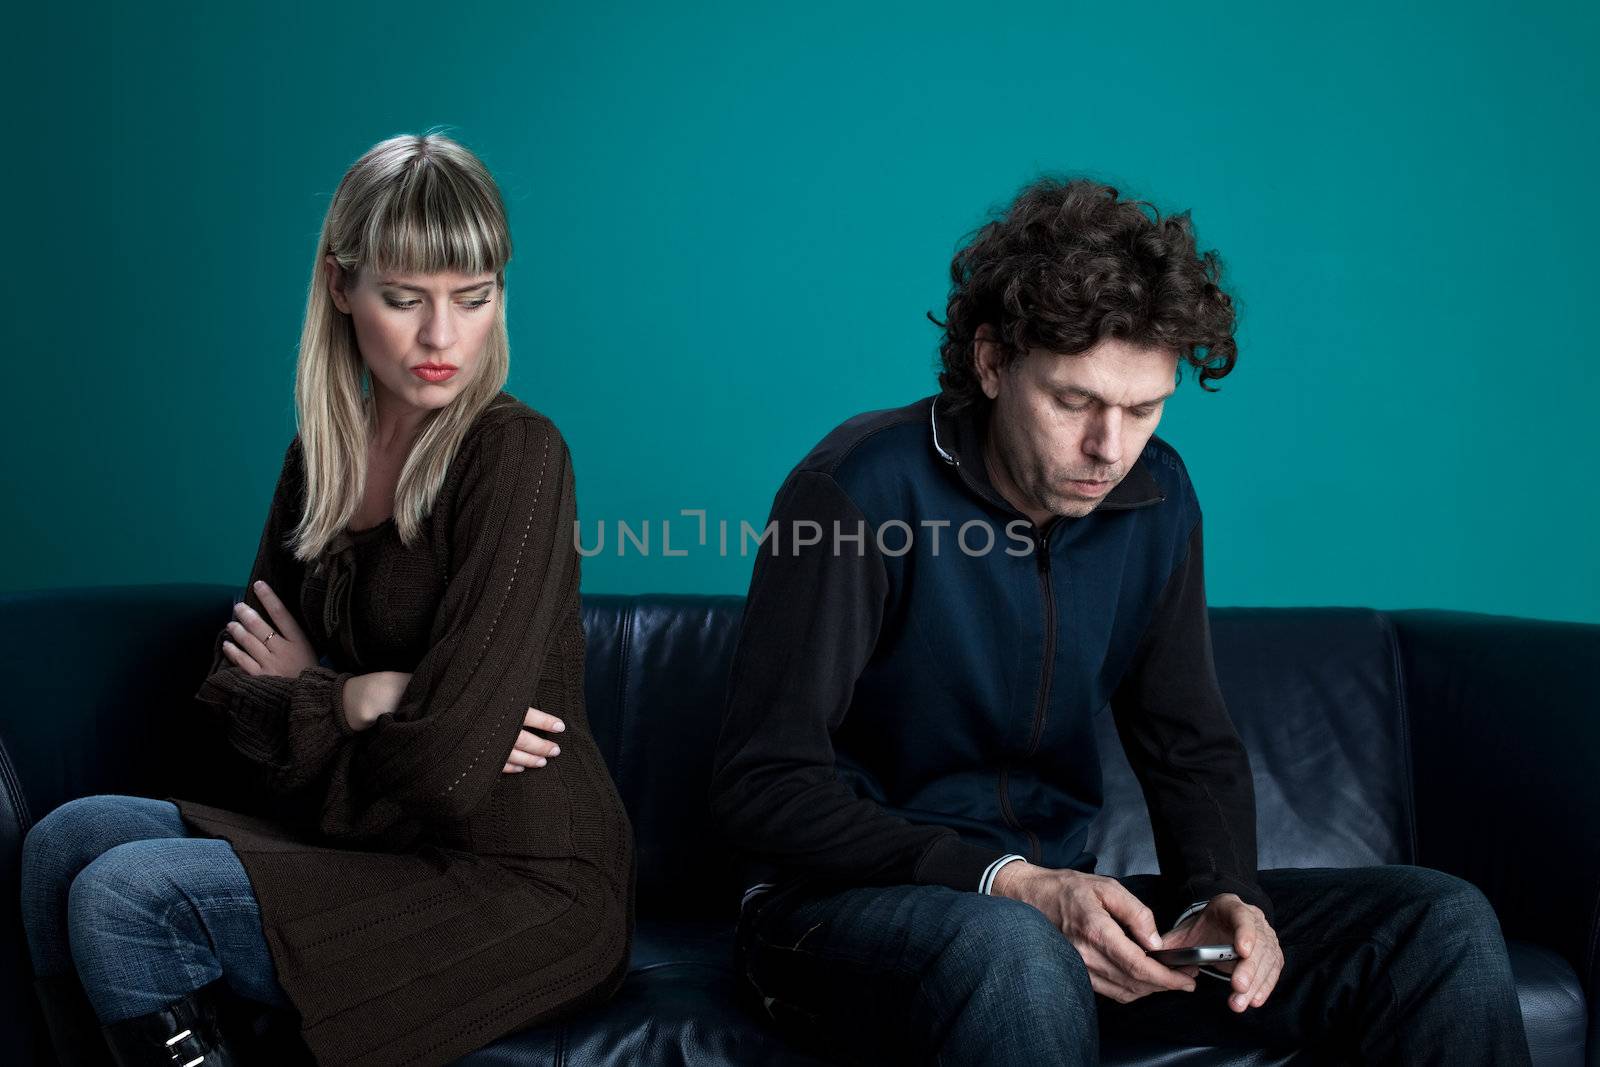 couple on a black leather couch with a cell phone